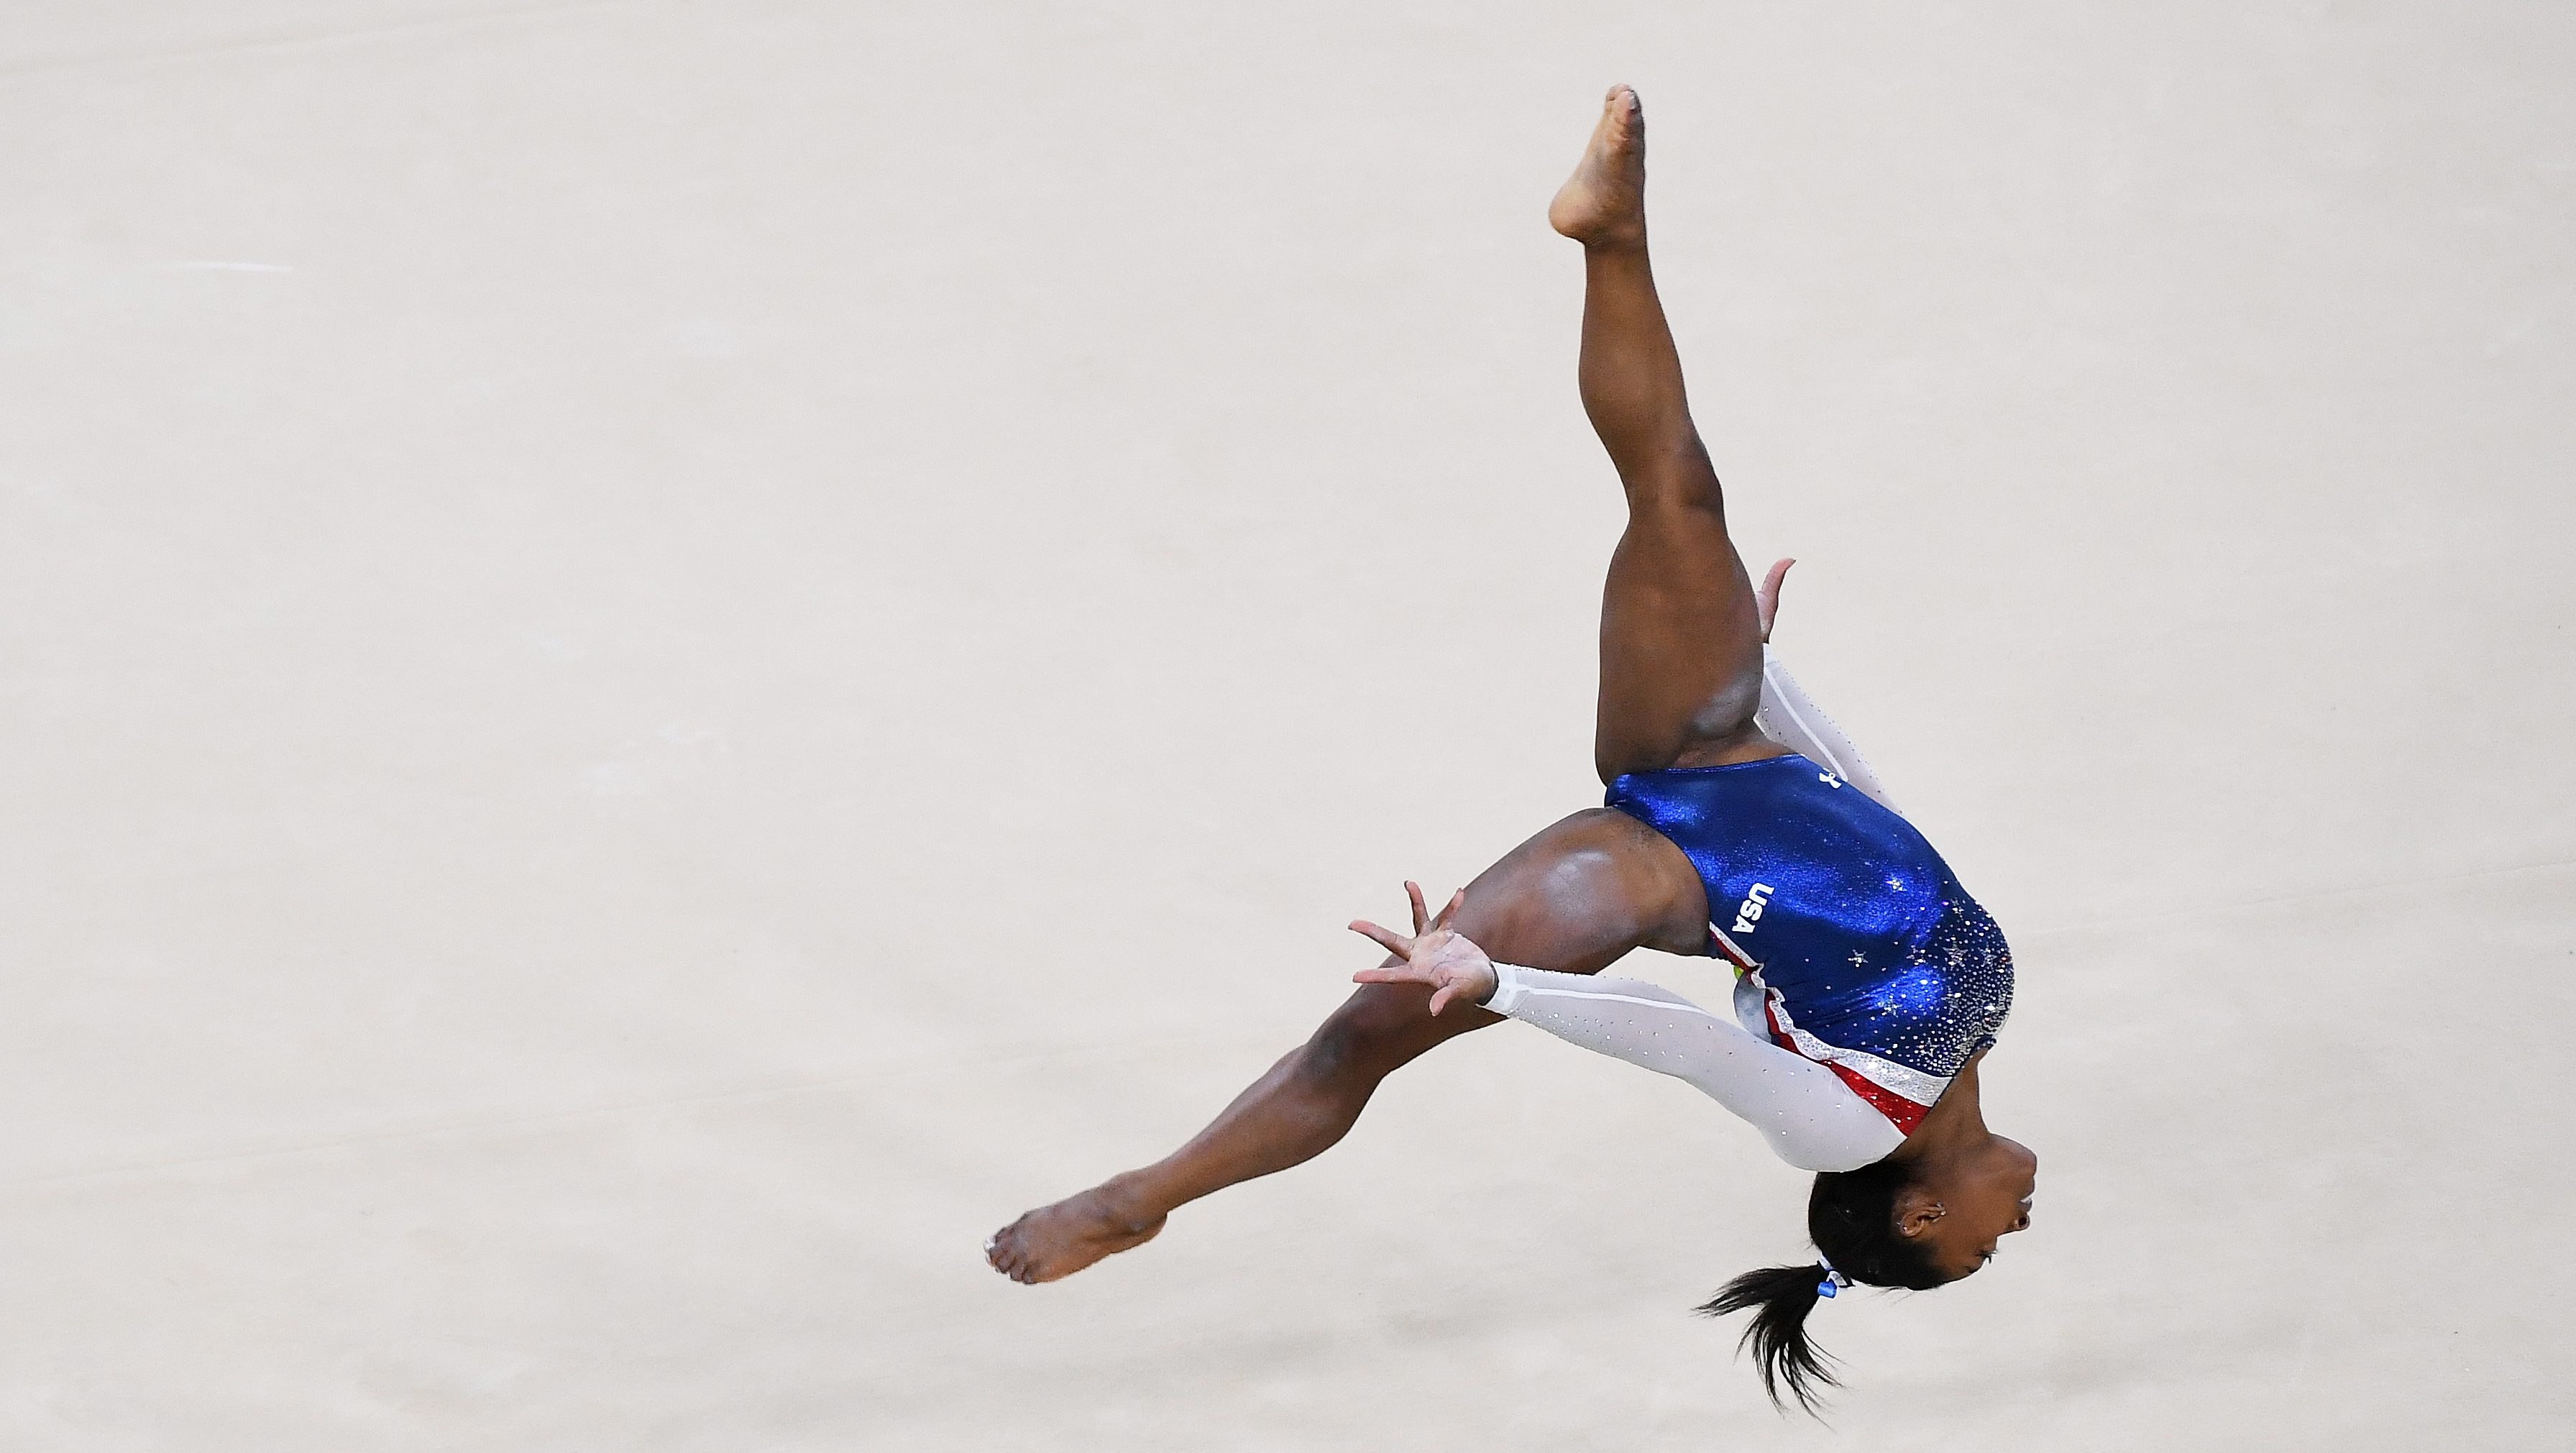 Stunning Floor Routine Gives Simone Biles the Gold Medal